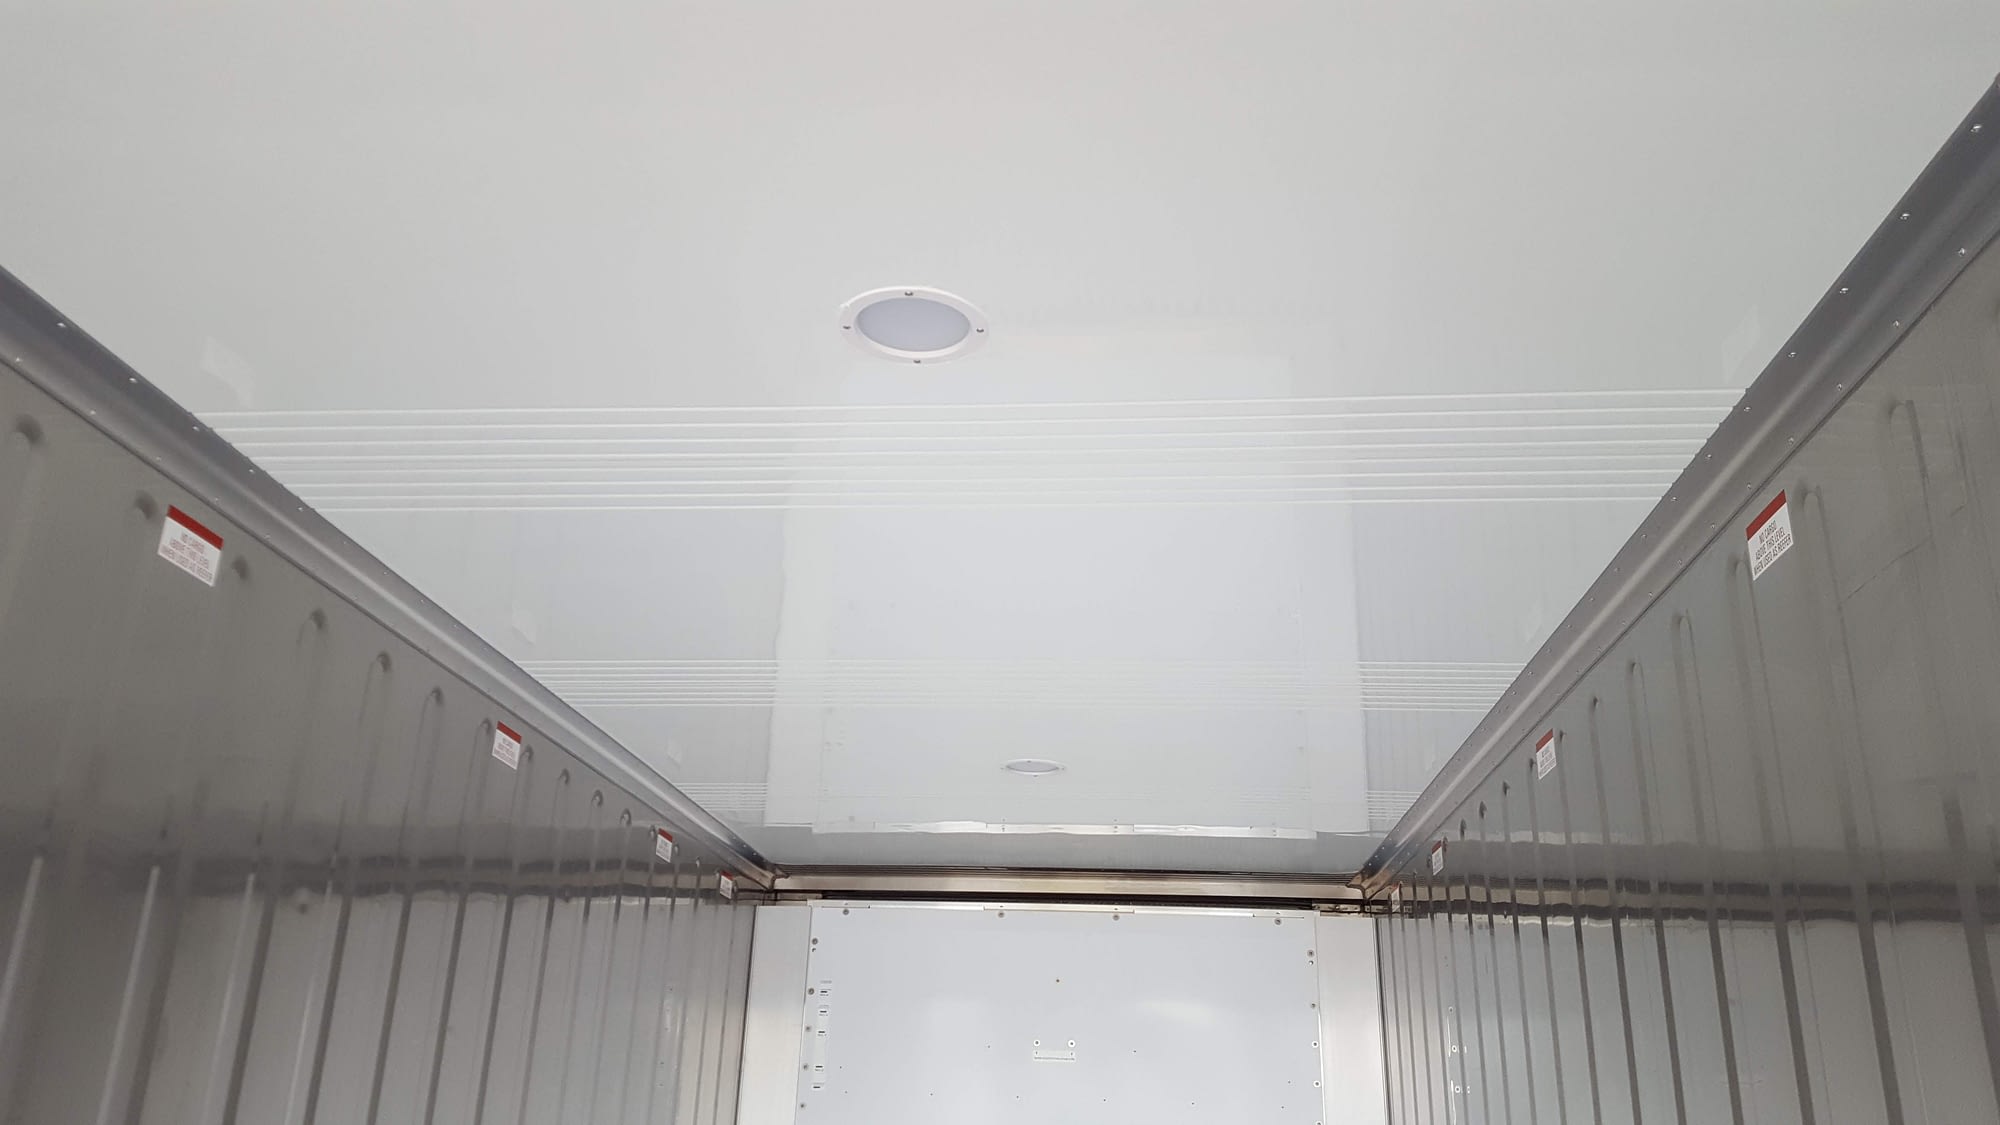 New TRS refrigeration containers have interior lights